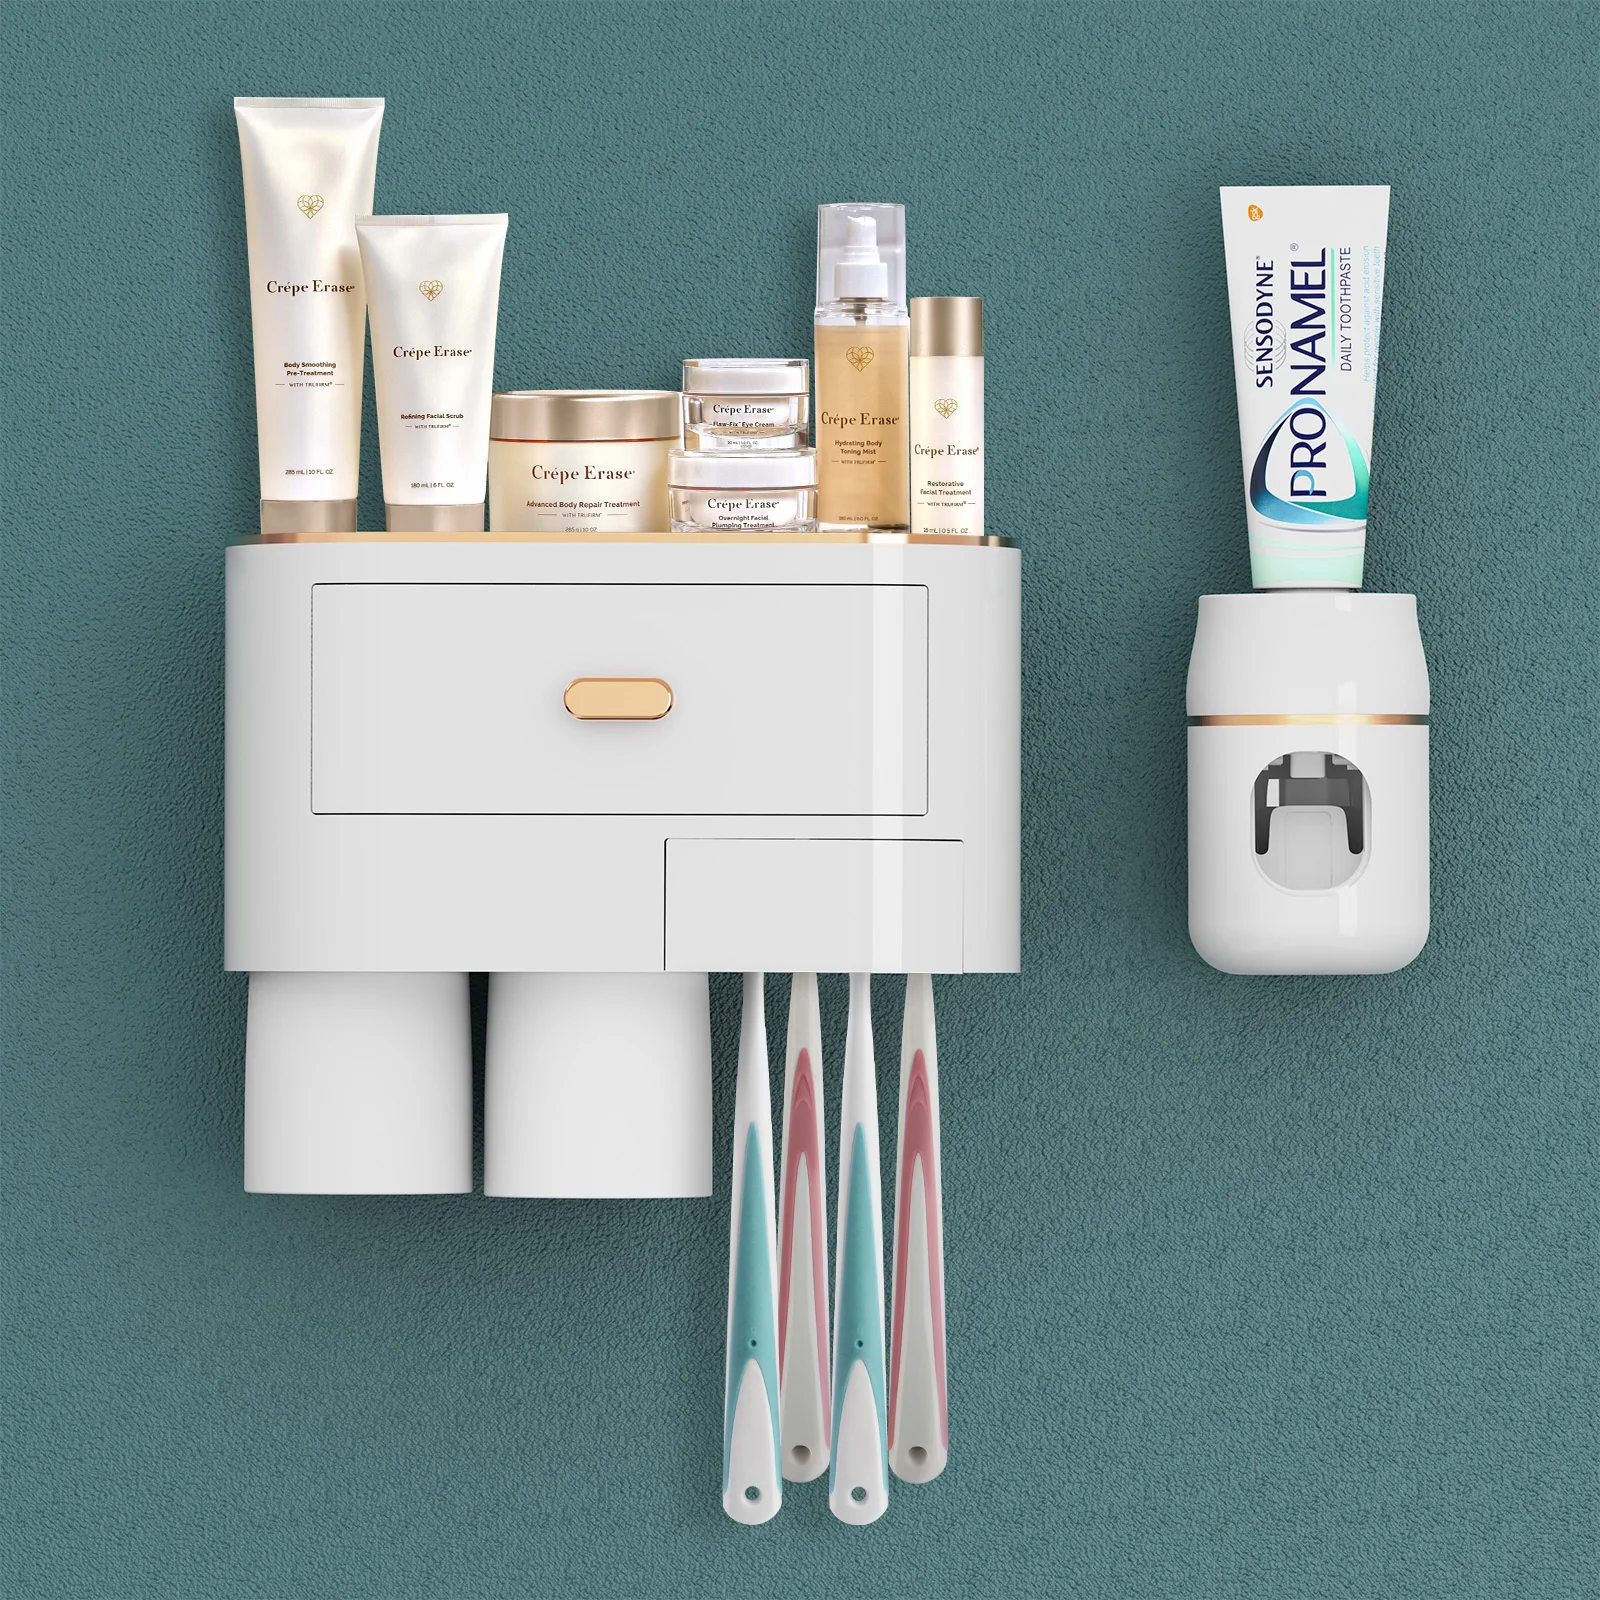 

Linkidea Toothbrush Holders Wall Mounted,Toothpaste Dispenser Squeezer for Household Space Saving Bathroom Accessories